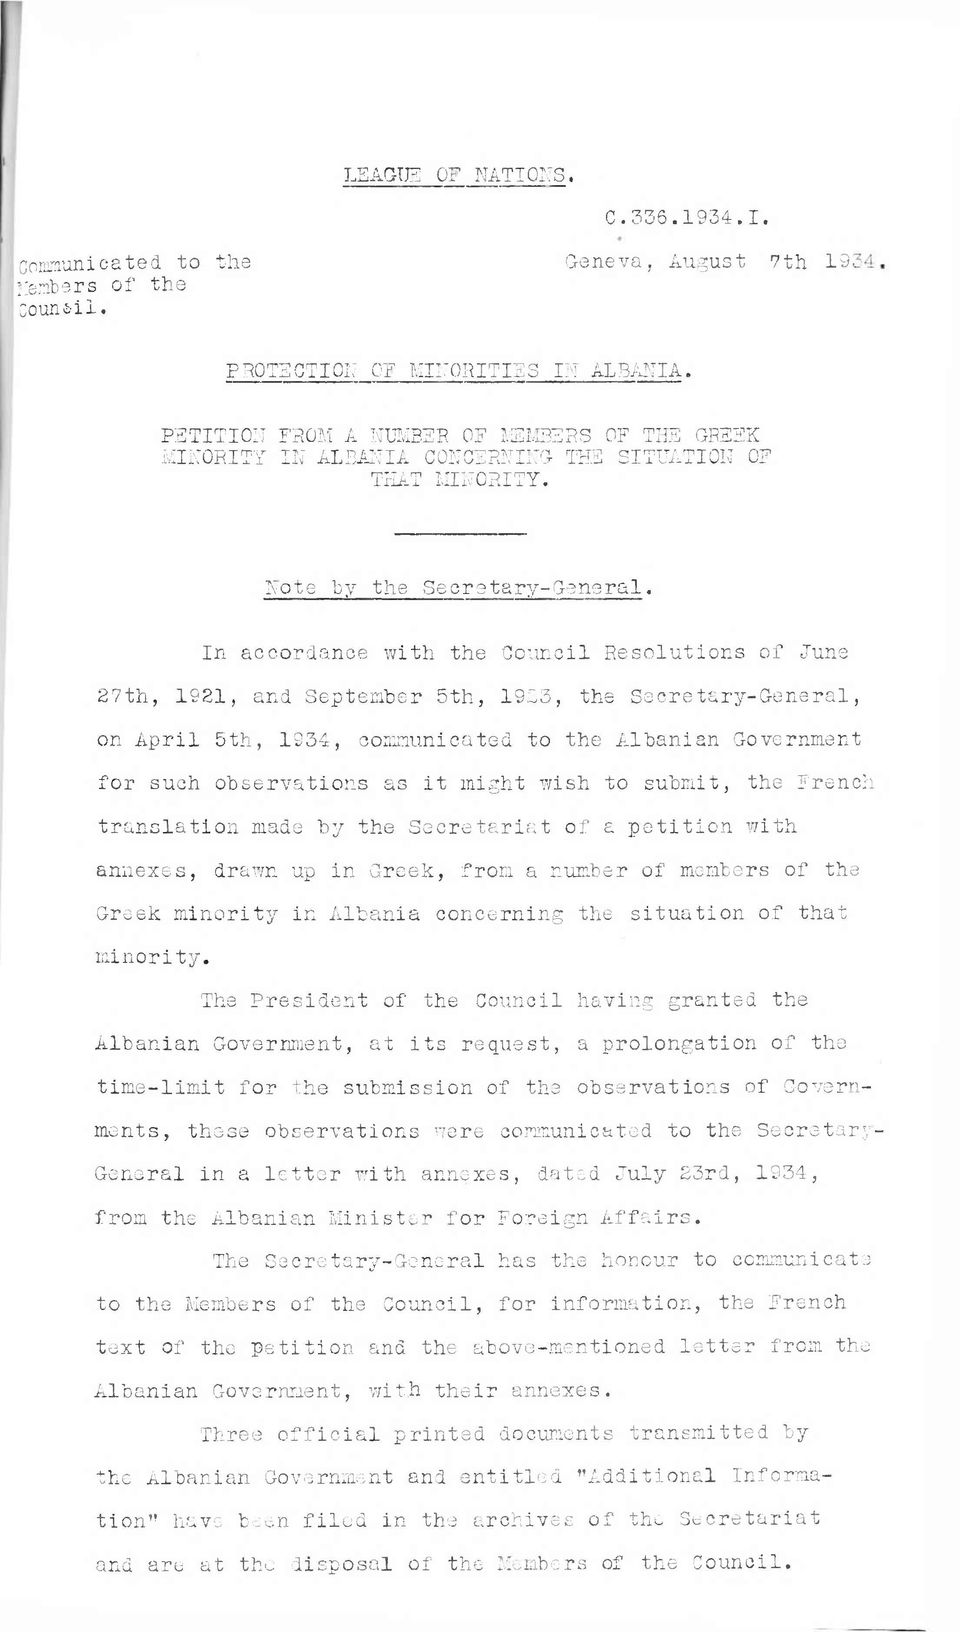 In accordance with the Council Resolutions of June 27th, 1921, and September 5th, 1983, the Secretary-General, on April 5th, 1934, communicated to the Albanian Government for such observations as it